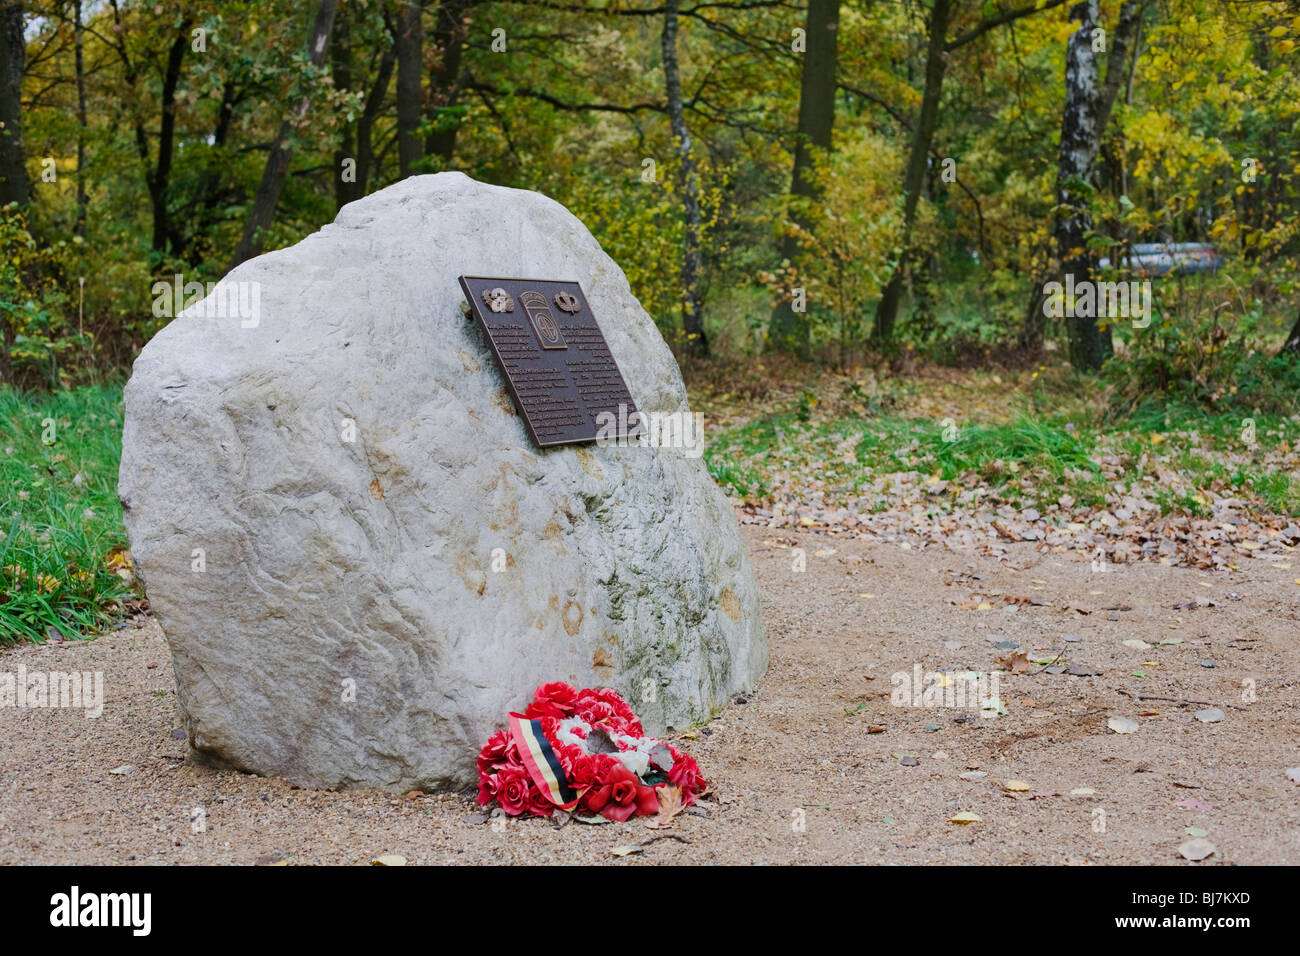 Memorial stone at the memorial to the former concentration camp in Wöbbelin, Mecklenburg-West Pomeraniat, Germany Stock Photo